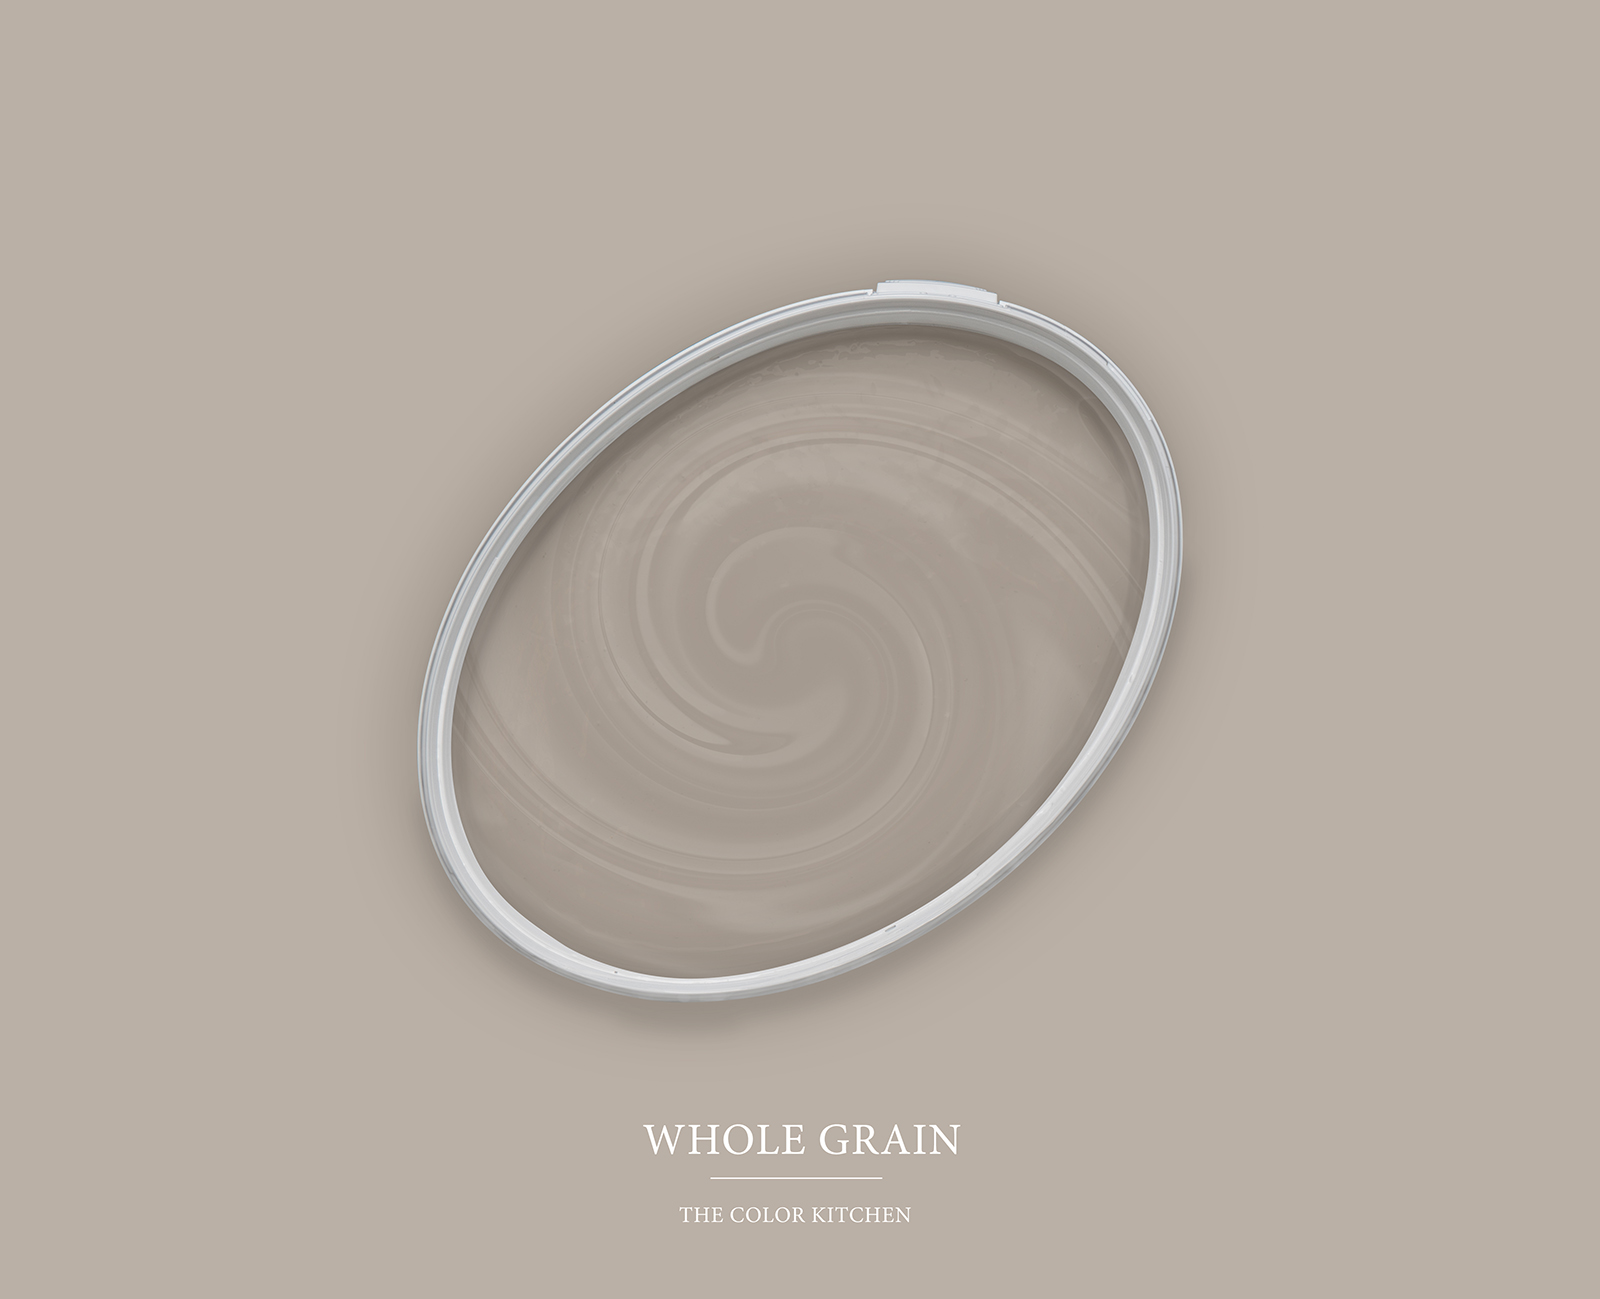         Wall Paint TCK1018 »Whole Grain« in typical taupe – 2.5 litre
    